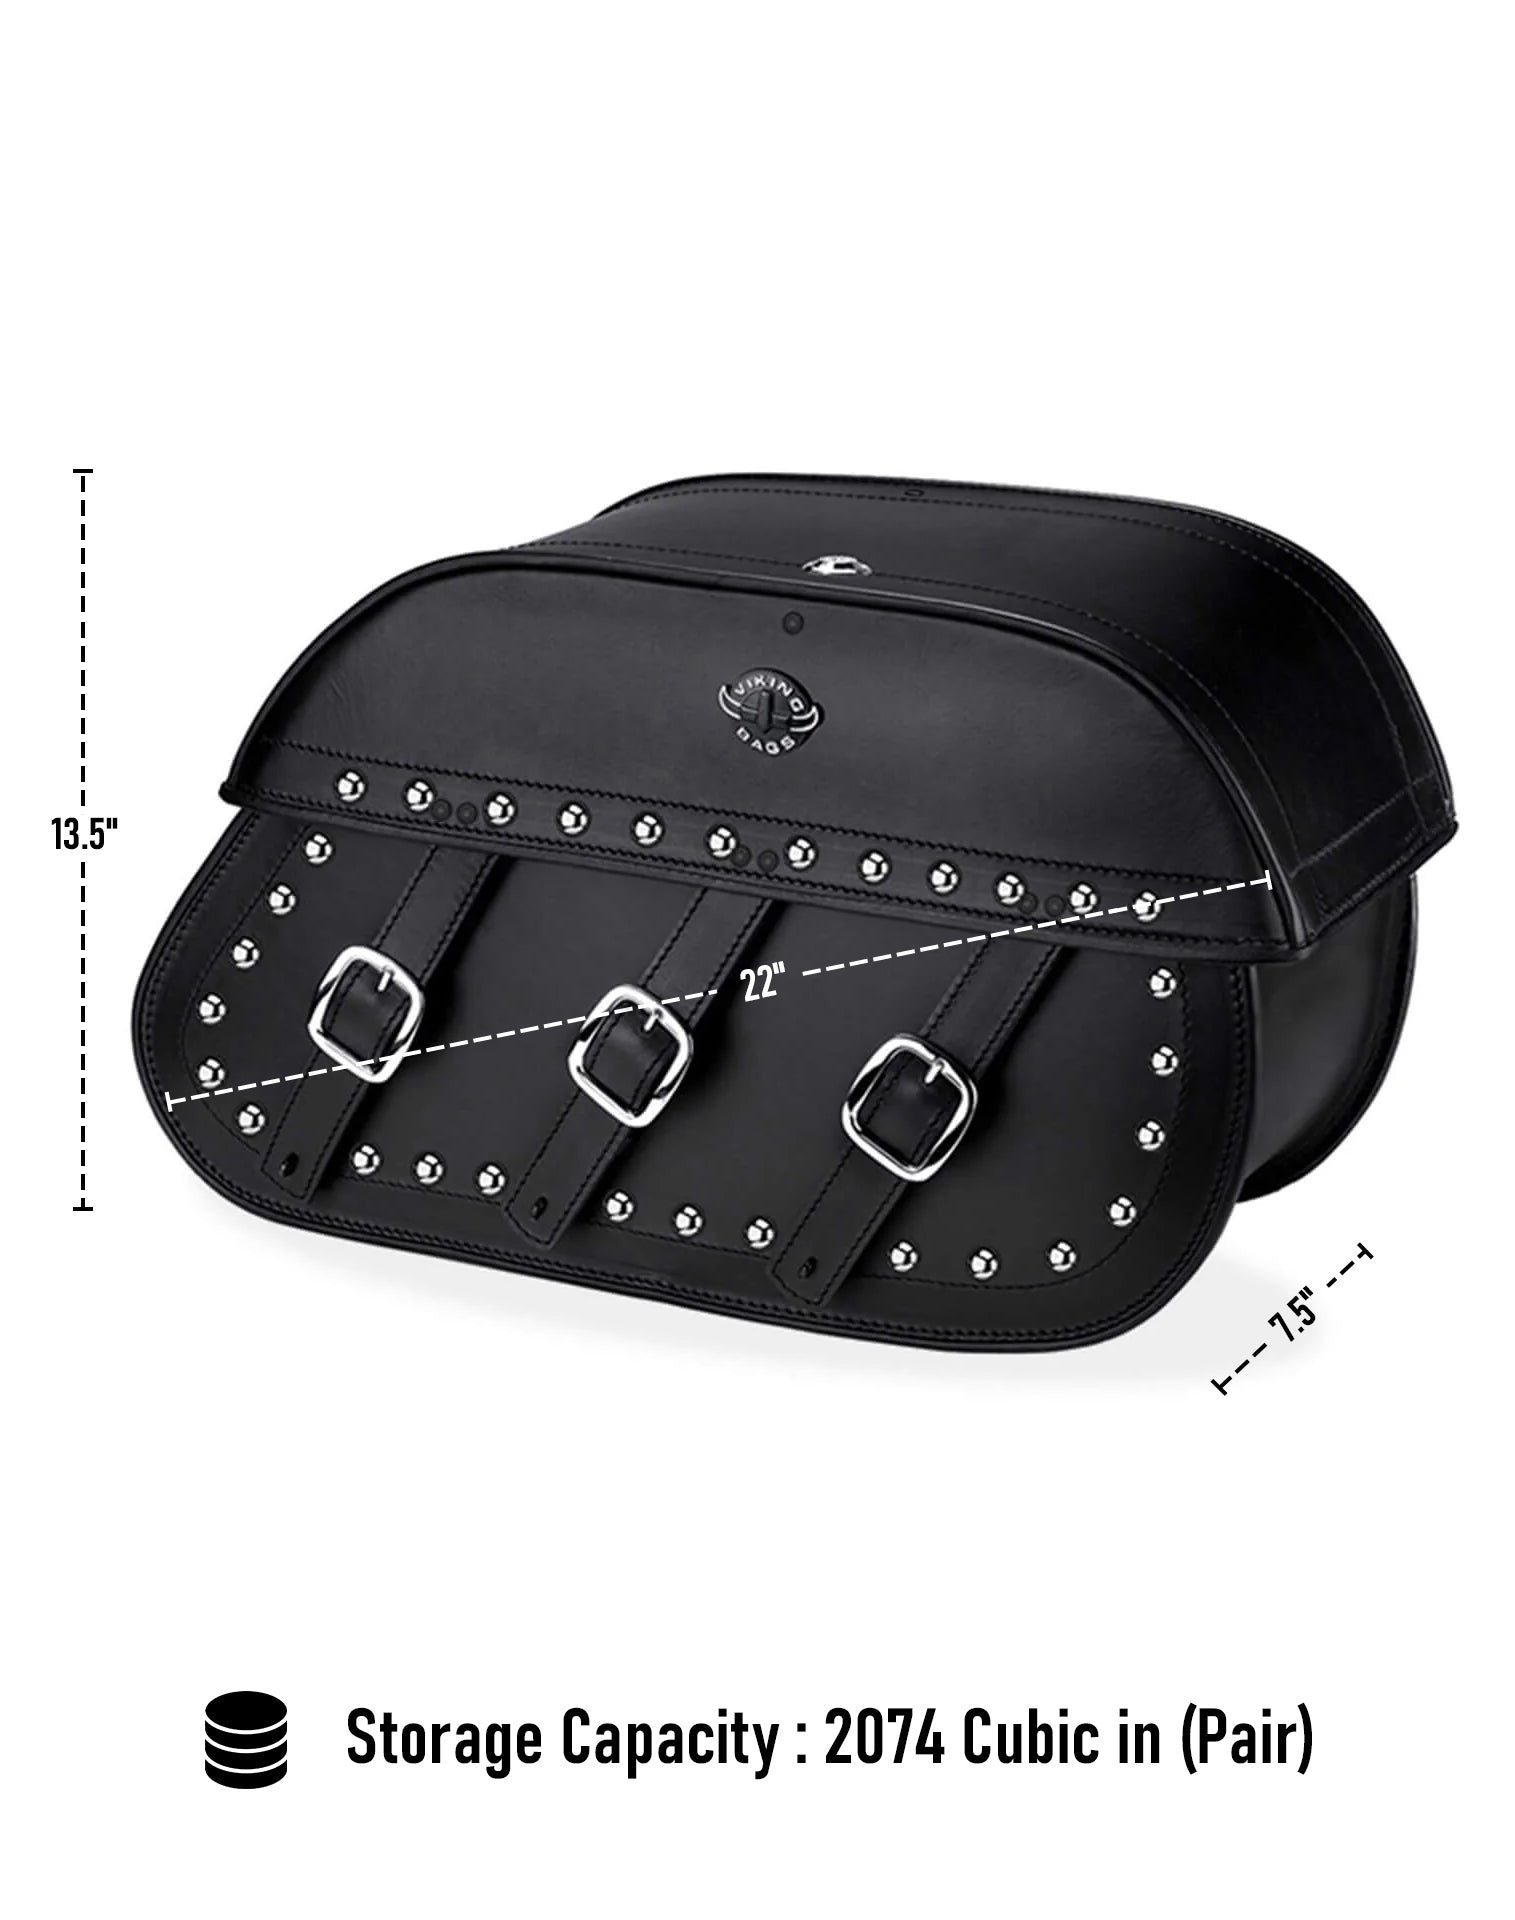 Viking Trianon Extra Large Yamaha V Star 950 Tourer Studded Leather Motorcycle Saddlebags Can Store Your Ridings Gears